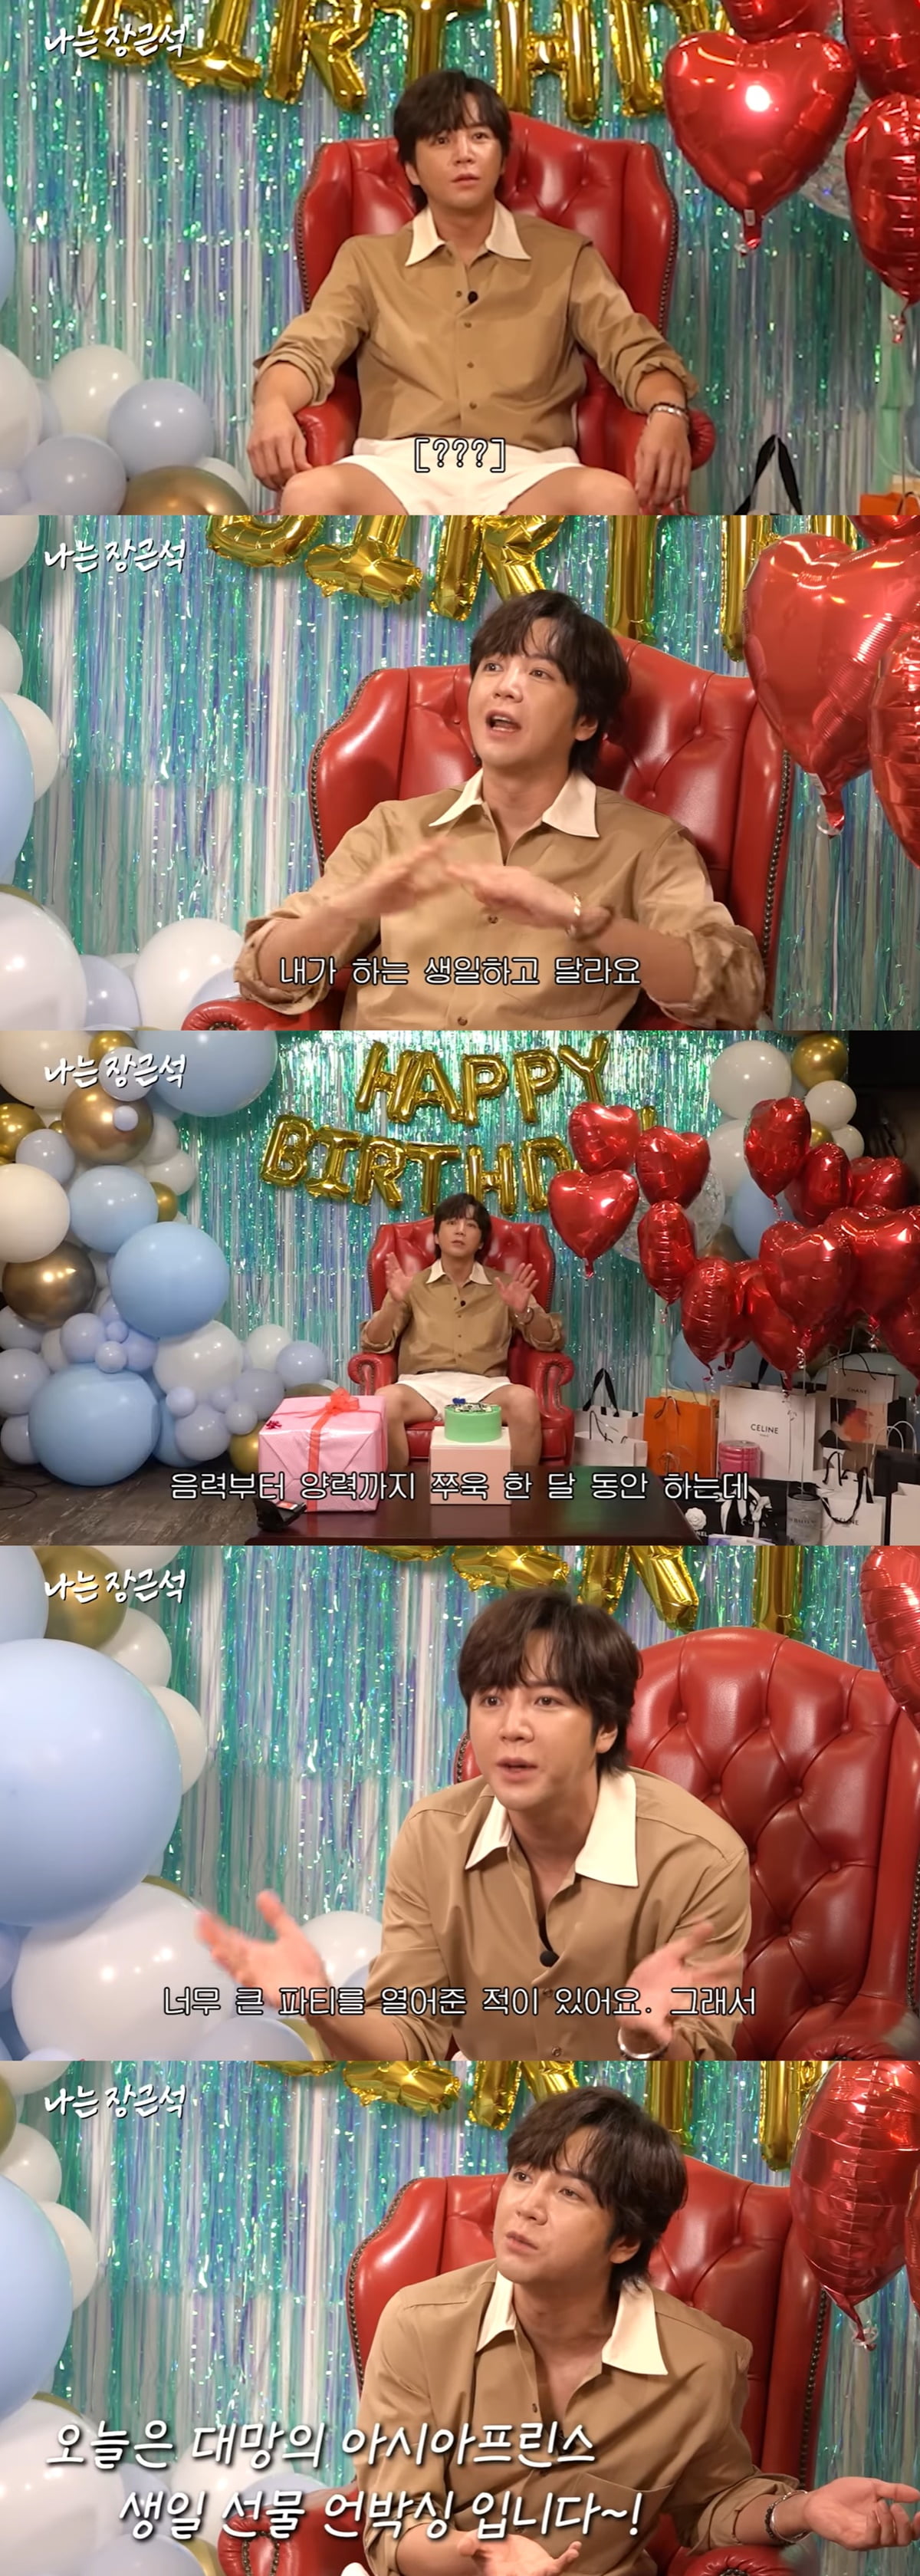 Jang Geun-suk "Next year's birthday gift, don't be burdened, go to a luxury company C"